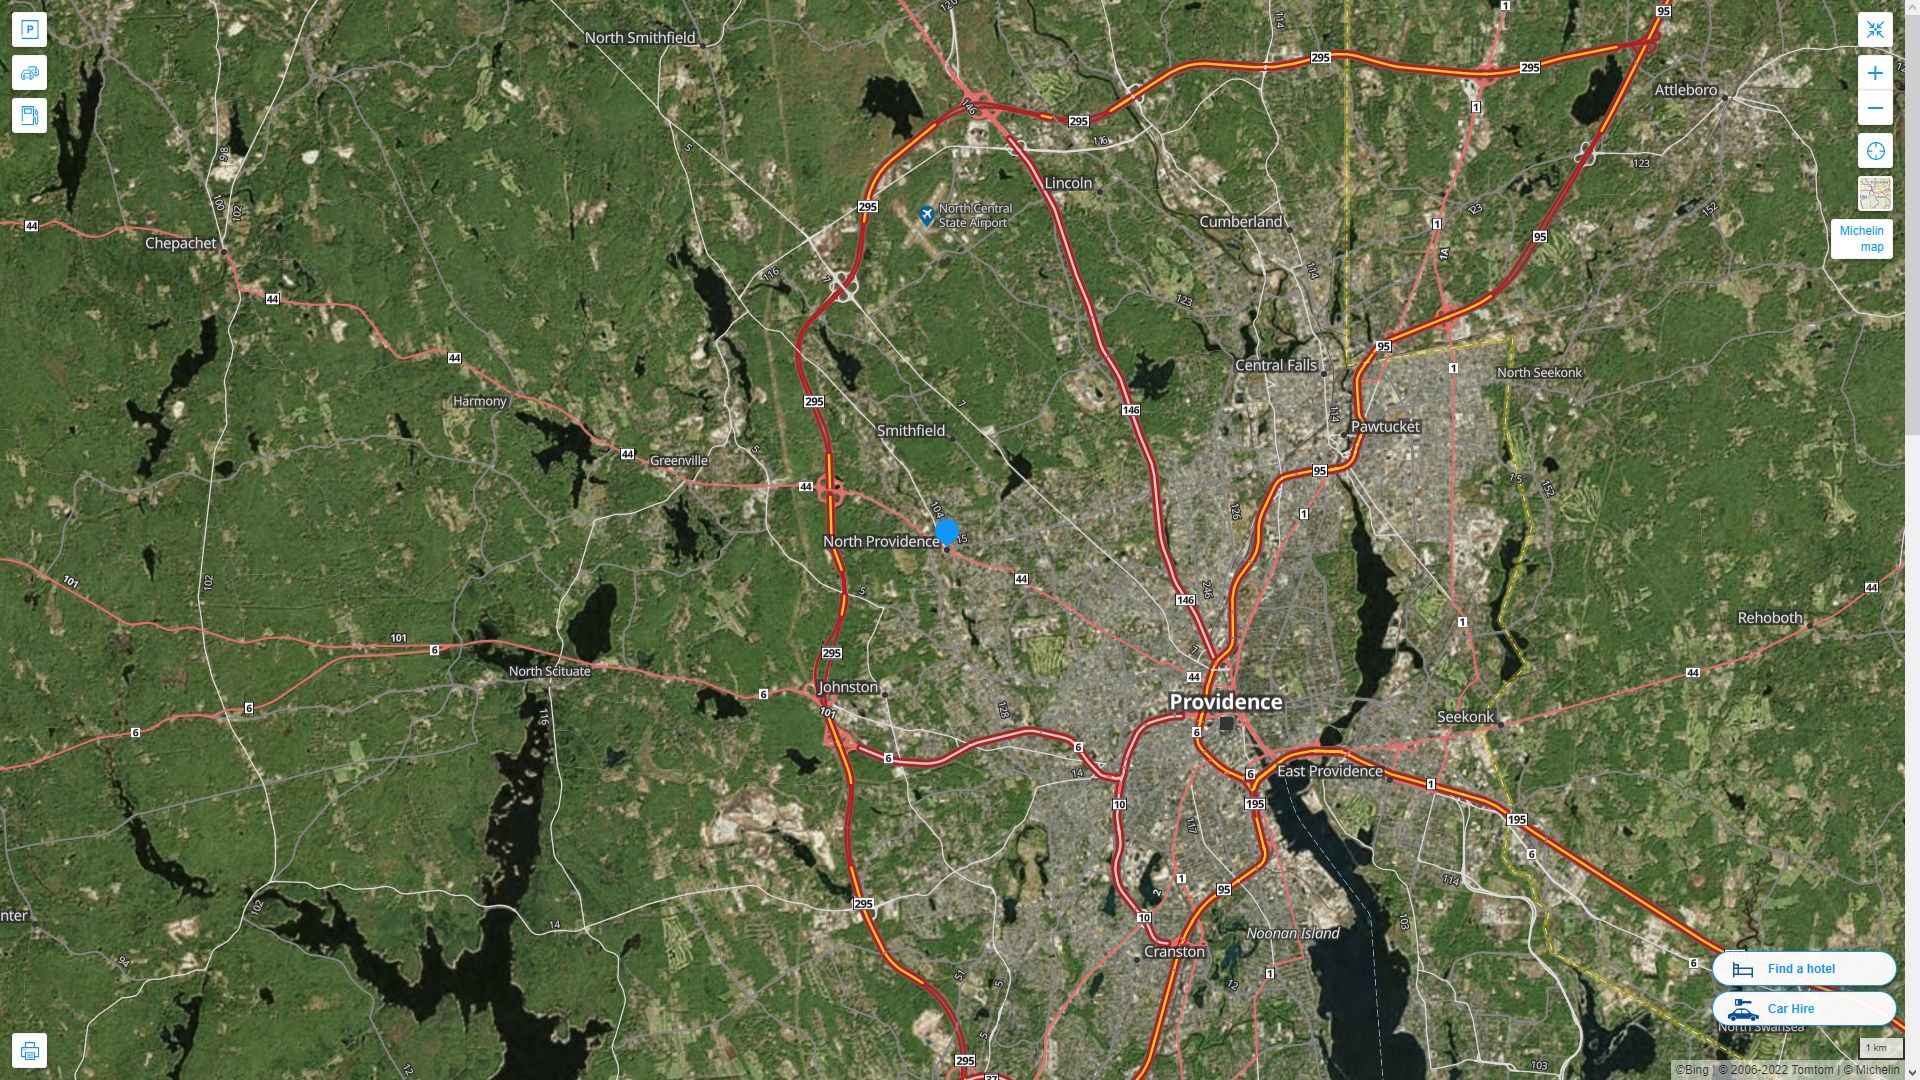 North Providence Town Rhode Island Highway and Road Map with Satellite View